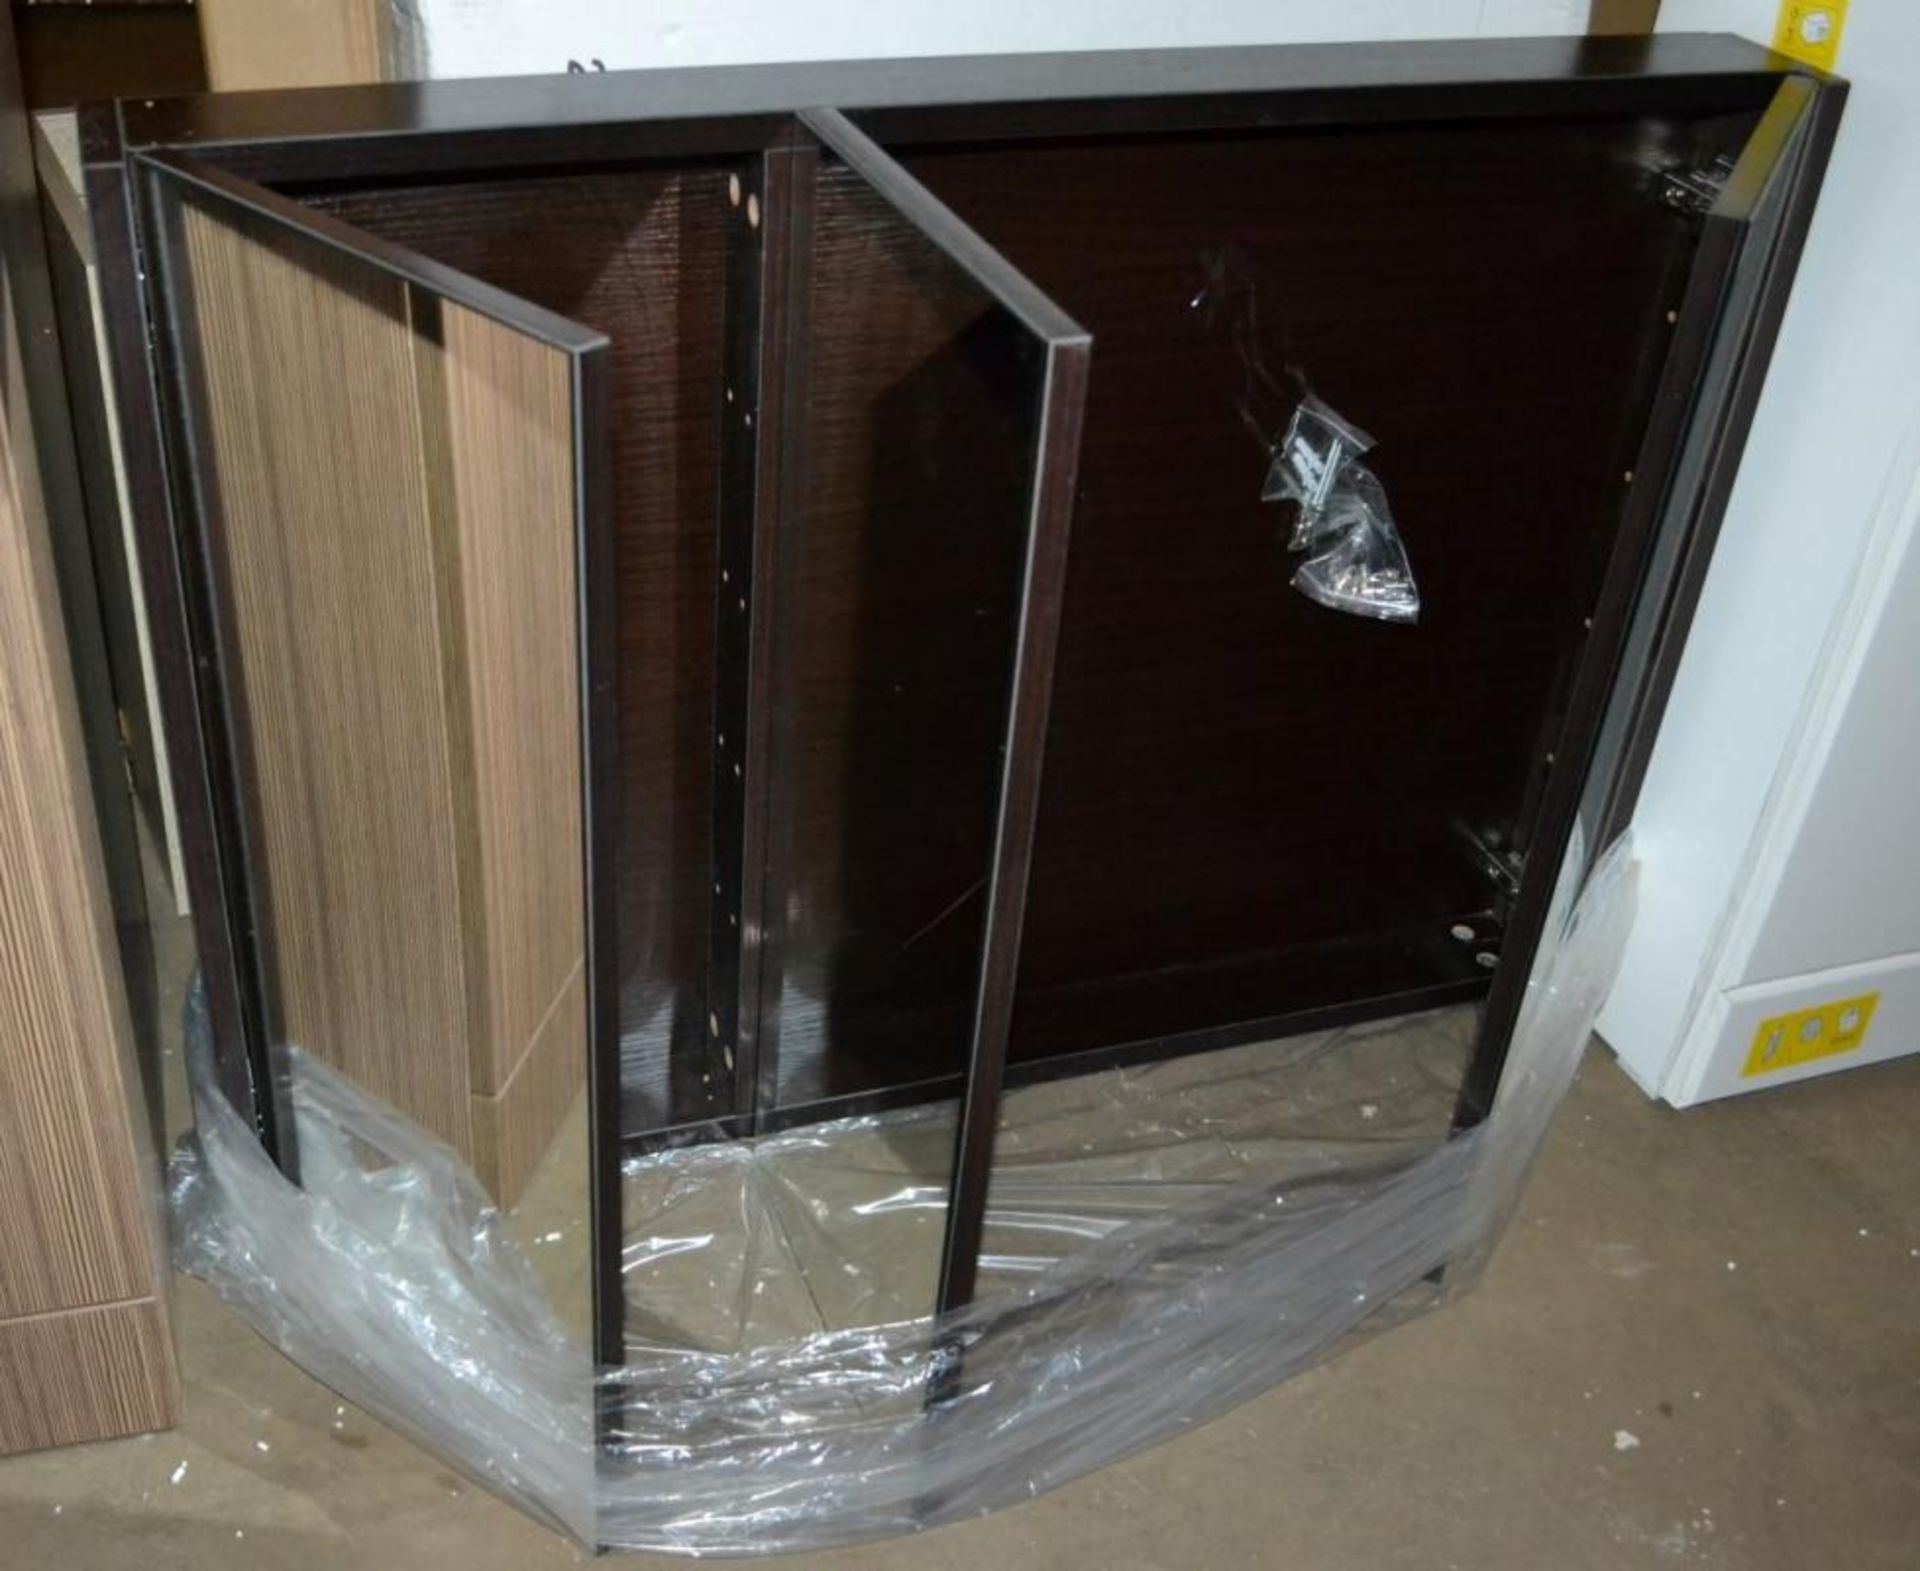 1 x Odessa Wenge 3 Door Bathroom Mirror Cabinet - Includes Sealed Bag Of Fittings - New / Unused Sto - Image 2 of 10